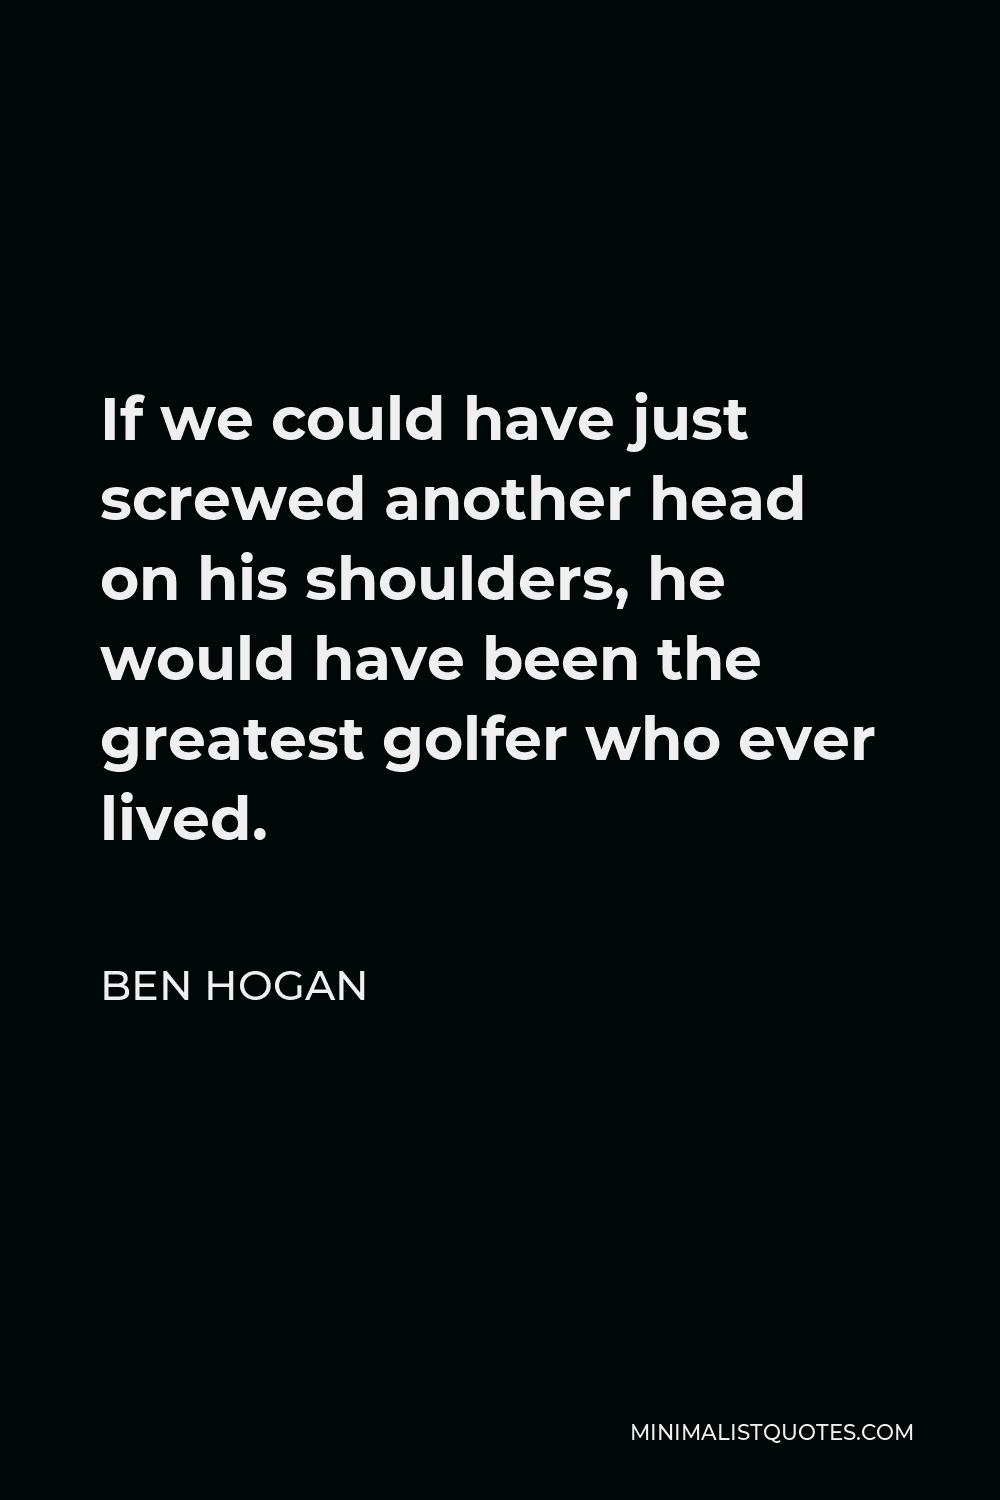 Ben Hogan Quote - If we could have just screwed another head on his shoulders, he would have been the greatest golfer who ever lived.